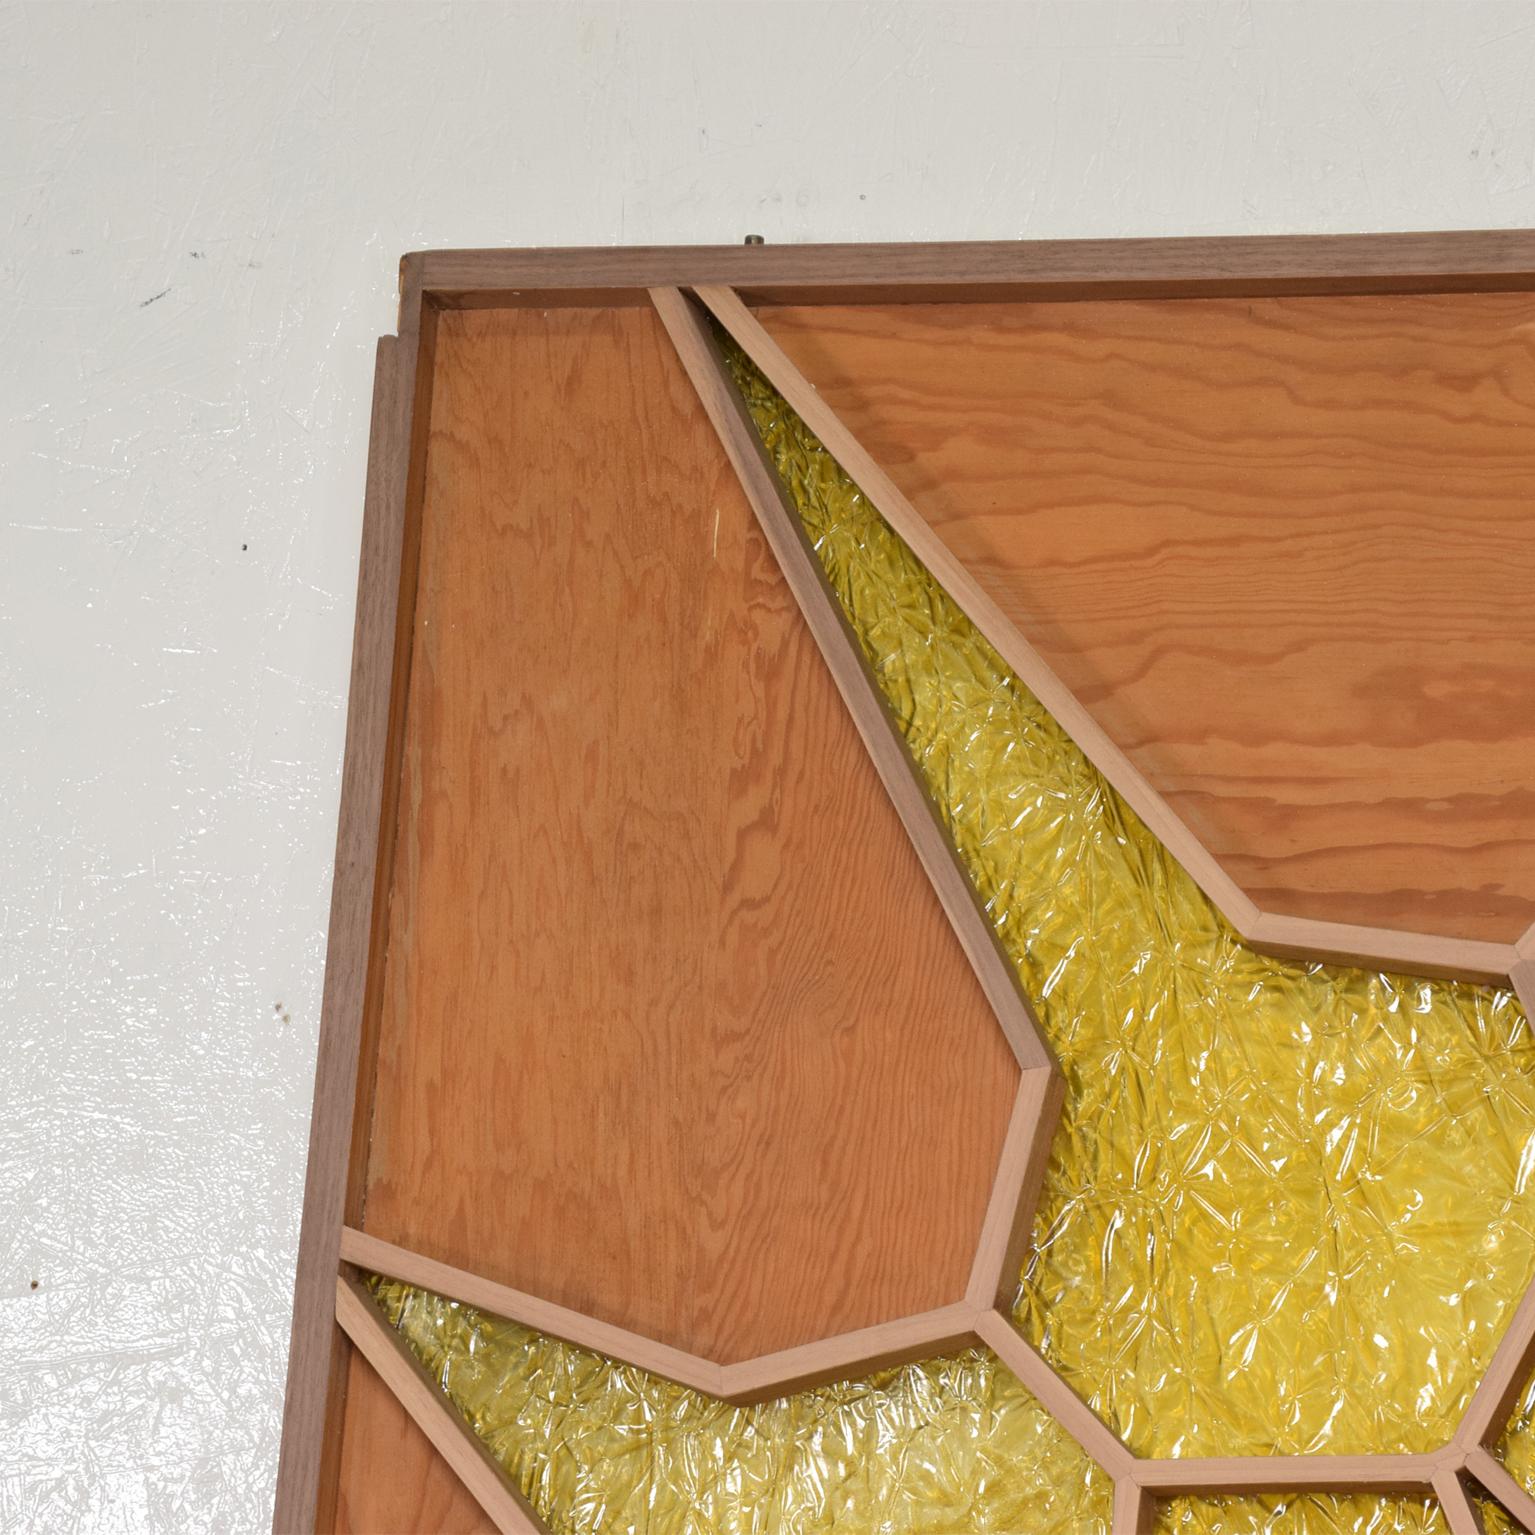 For your consideration, a decorative custom door panel room divider. Mexican modernist.
Construction made on plywood with some walnut veneer. Original plexiglass in gold yellow with Brutalist texture.
Unknown maker. Mexico, circa late